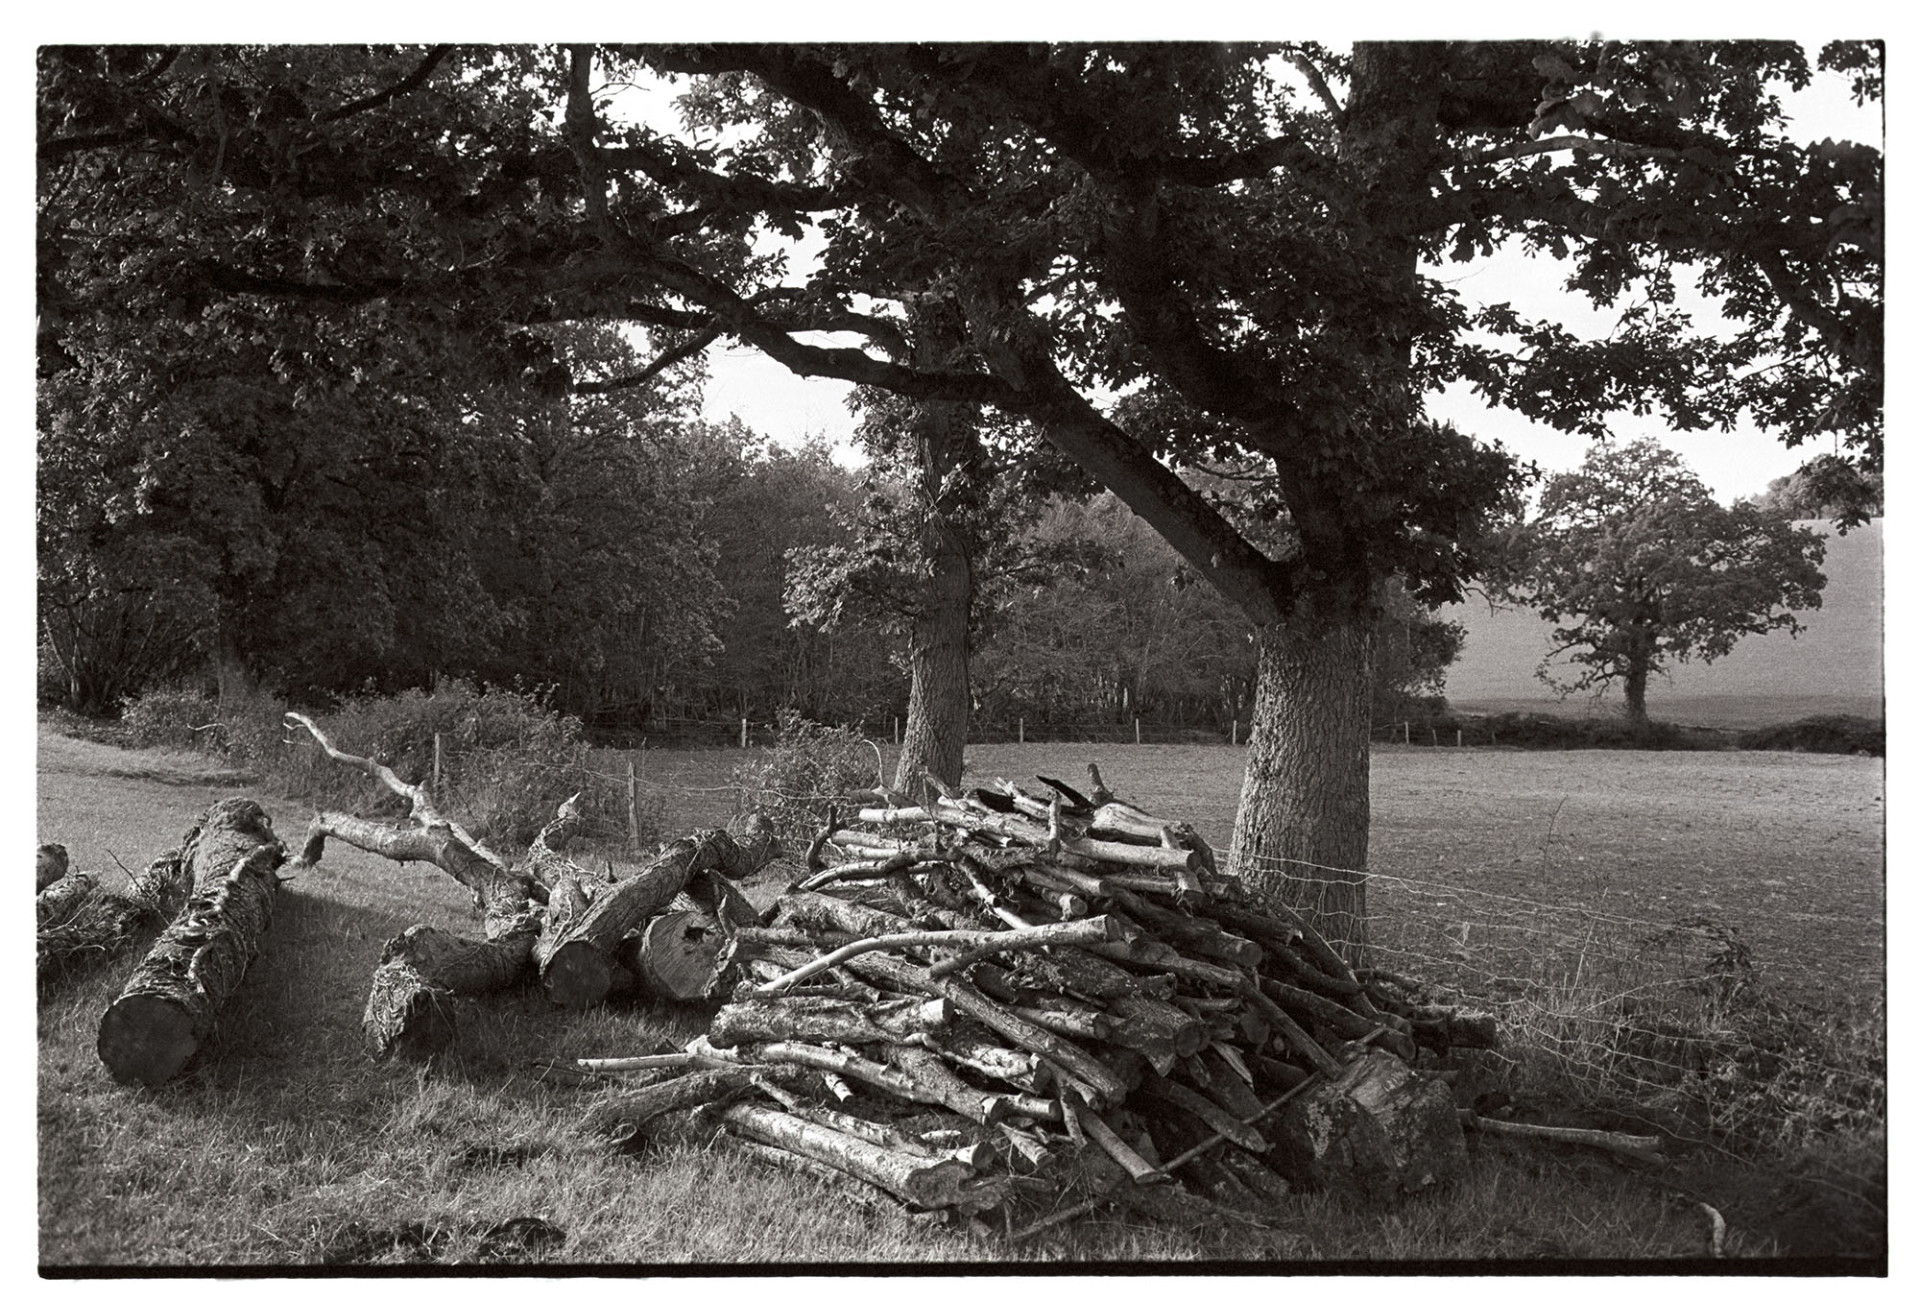 Oak trees and woodpile.
[A woodpile of logs and tree trunks beneath oak trees in Dowland.]